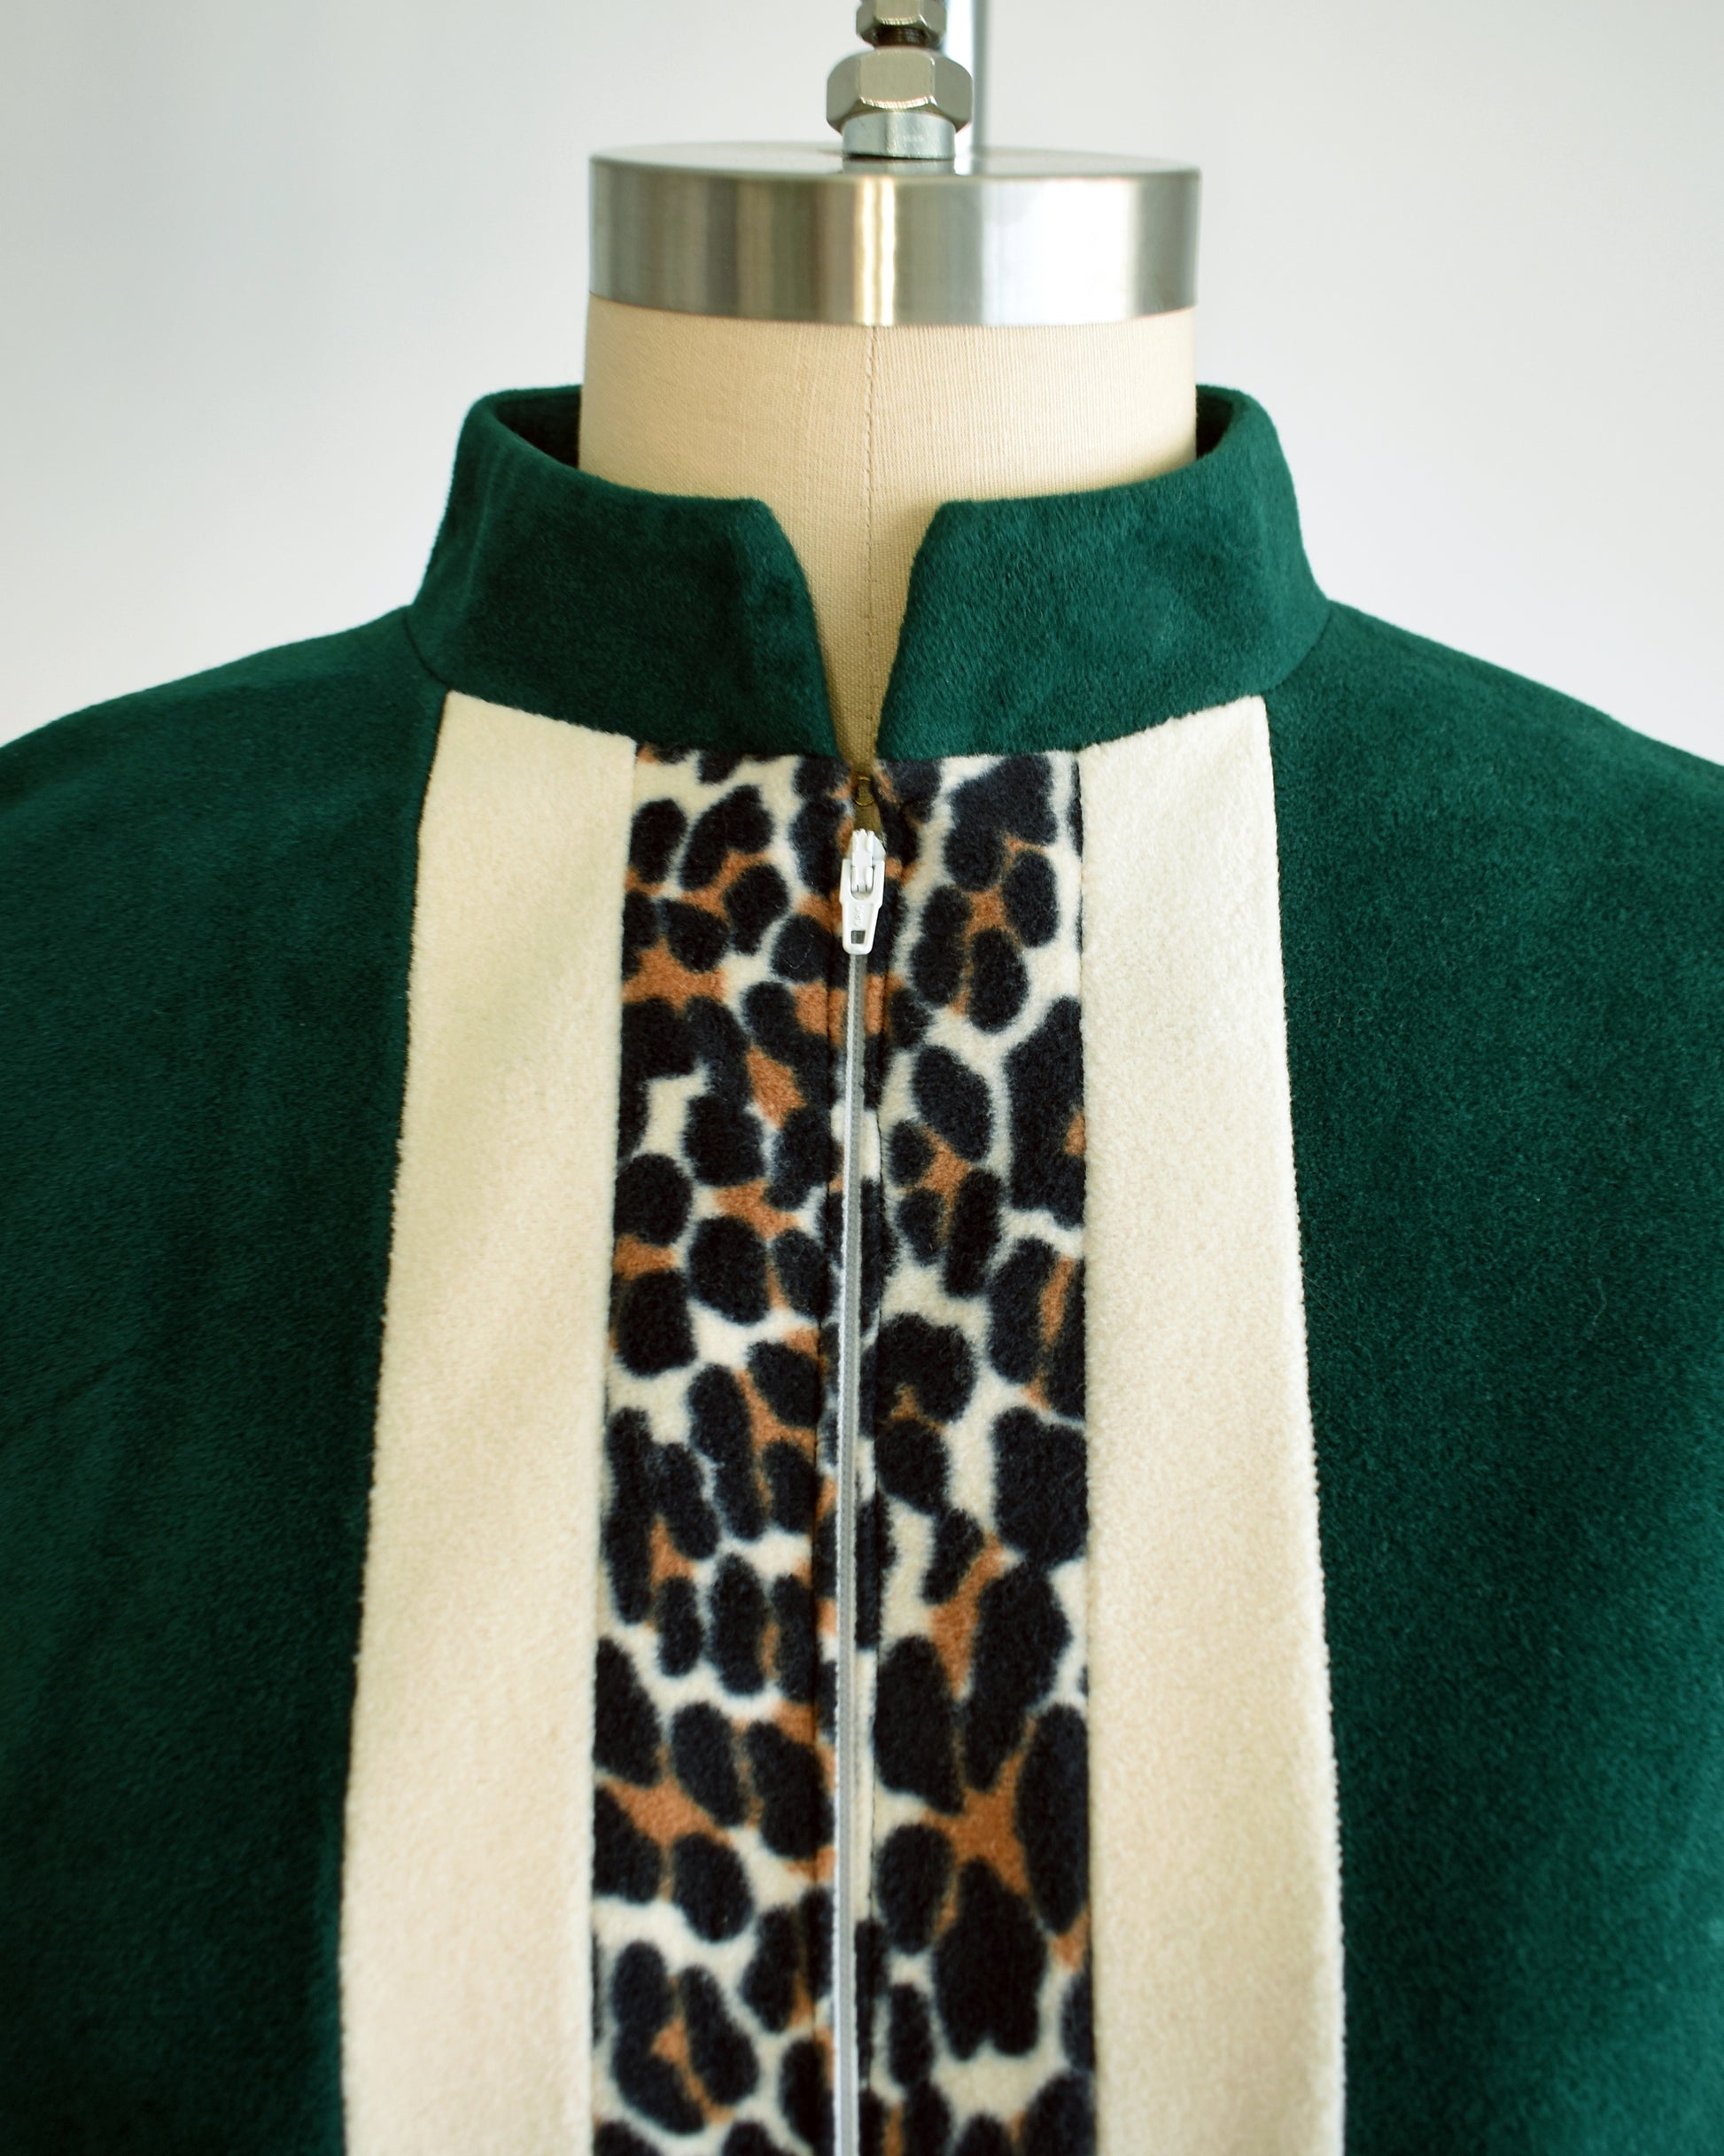 Close up of the collar, zipper, and striped front